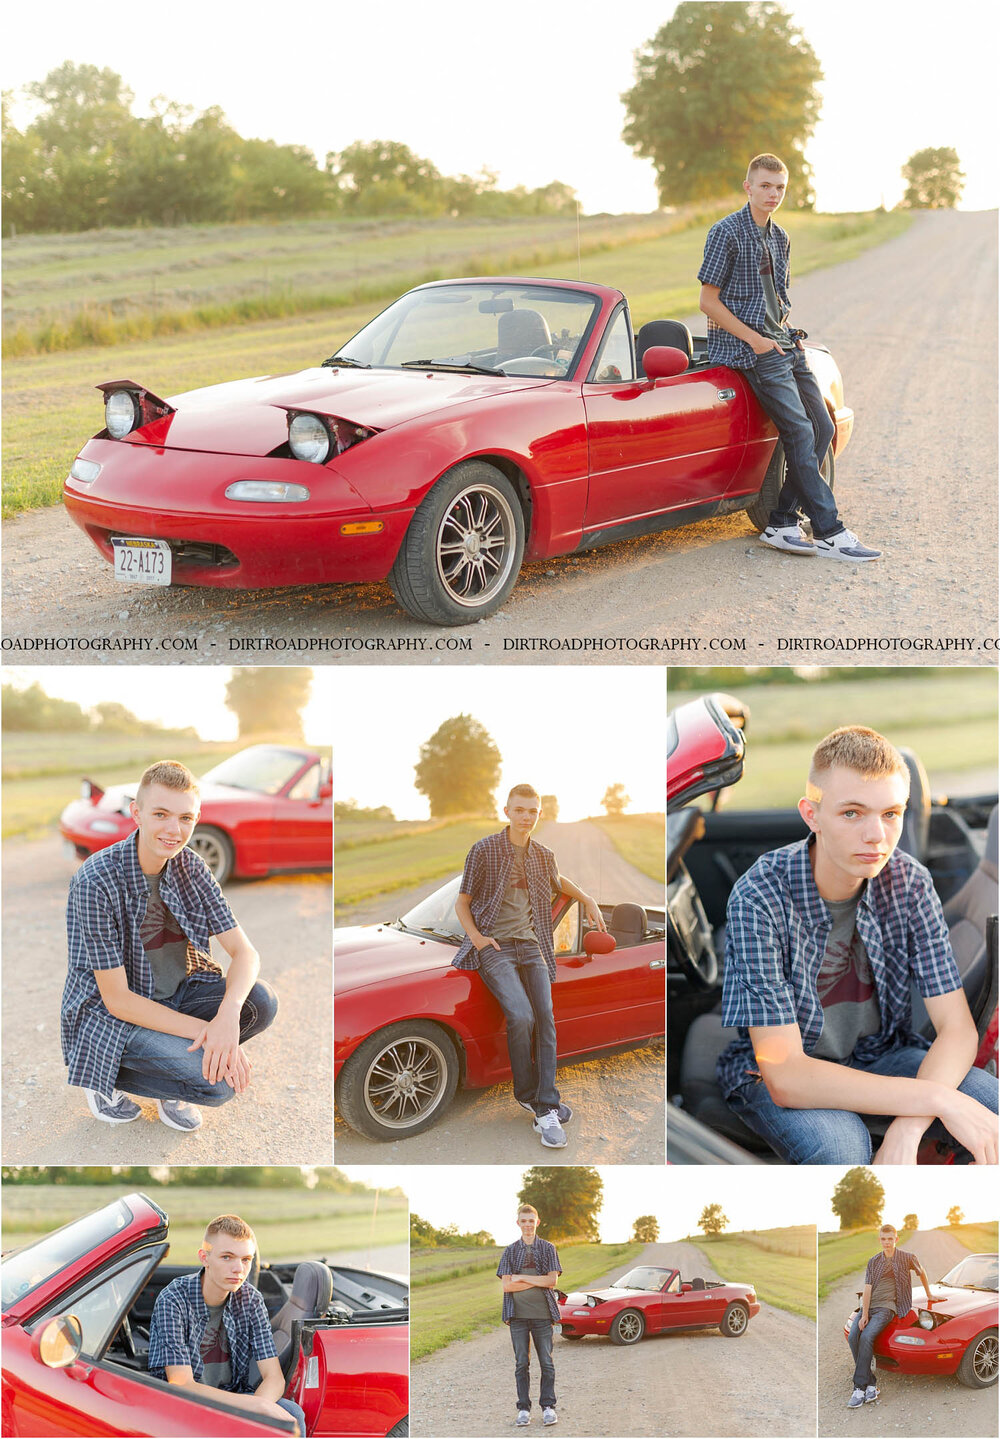 images of high school senior guy named ames of crete, nebraska. he attends crete high school and is part of the class of 2020. photos with trap shooting, cross country and cars at sunset in nebraska. crete ikes trap team, doane university, tuxedo park. photographer is kelsey homolka nerud of wilber nebraska who specializes in high school senior photography and senior pictures.